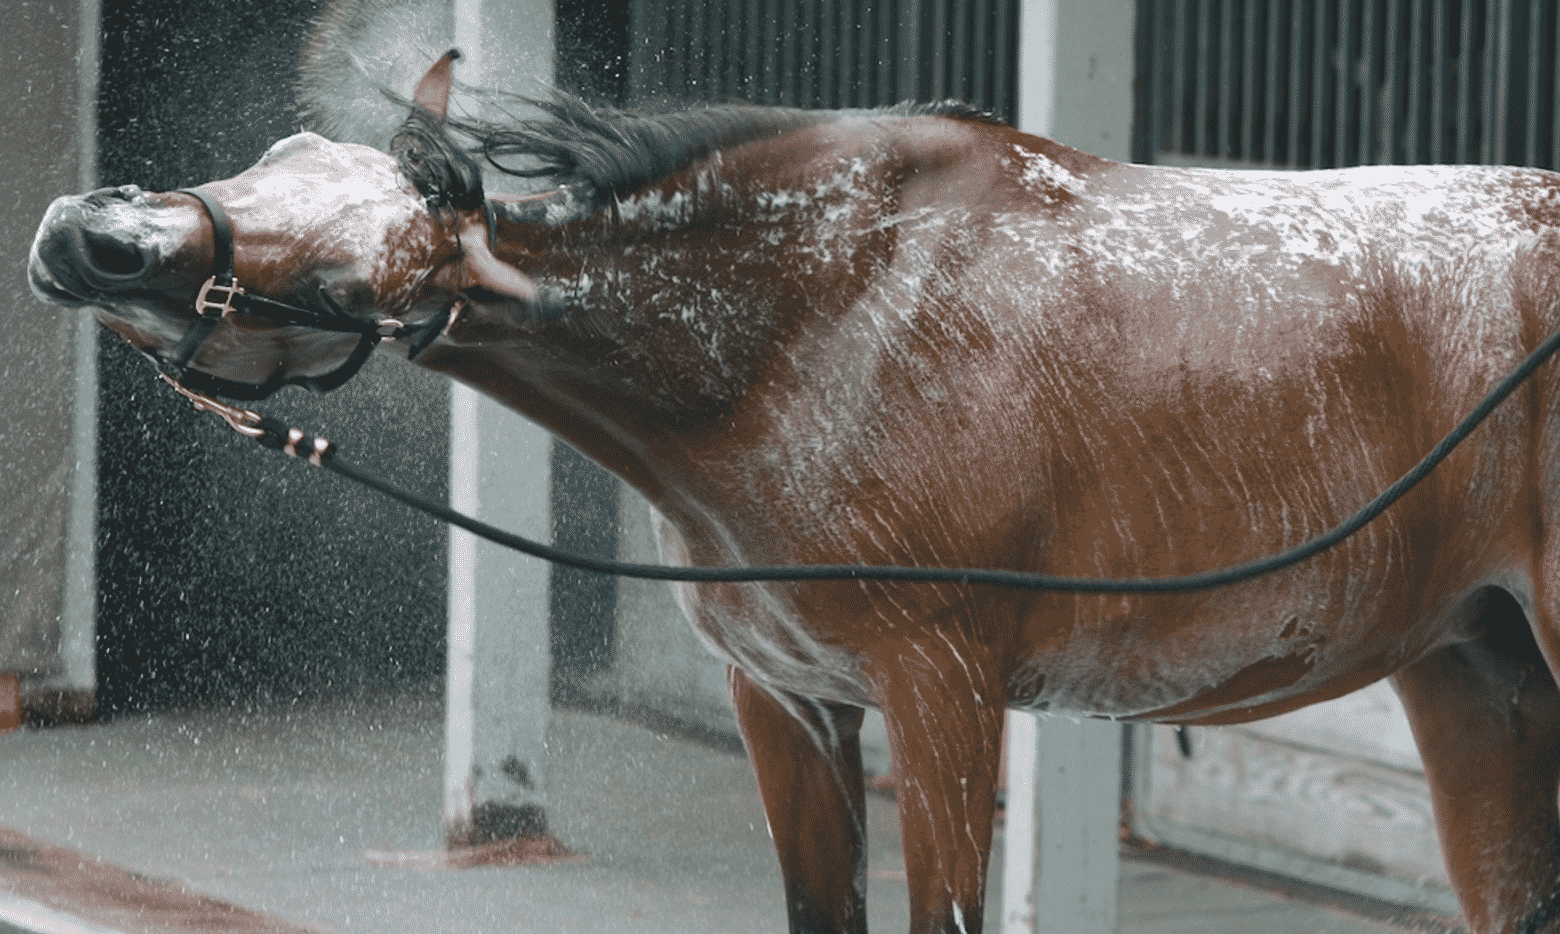 Don't leave your horse with shampoo on him for too long